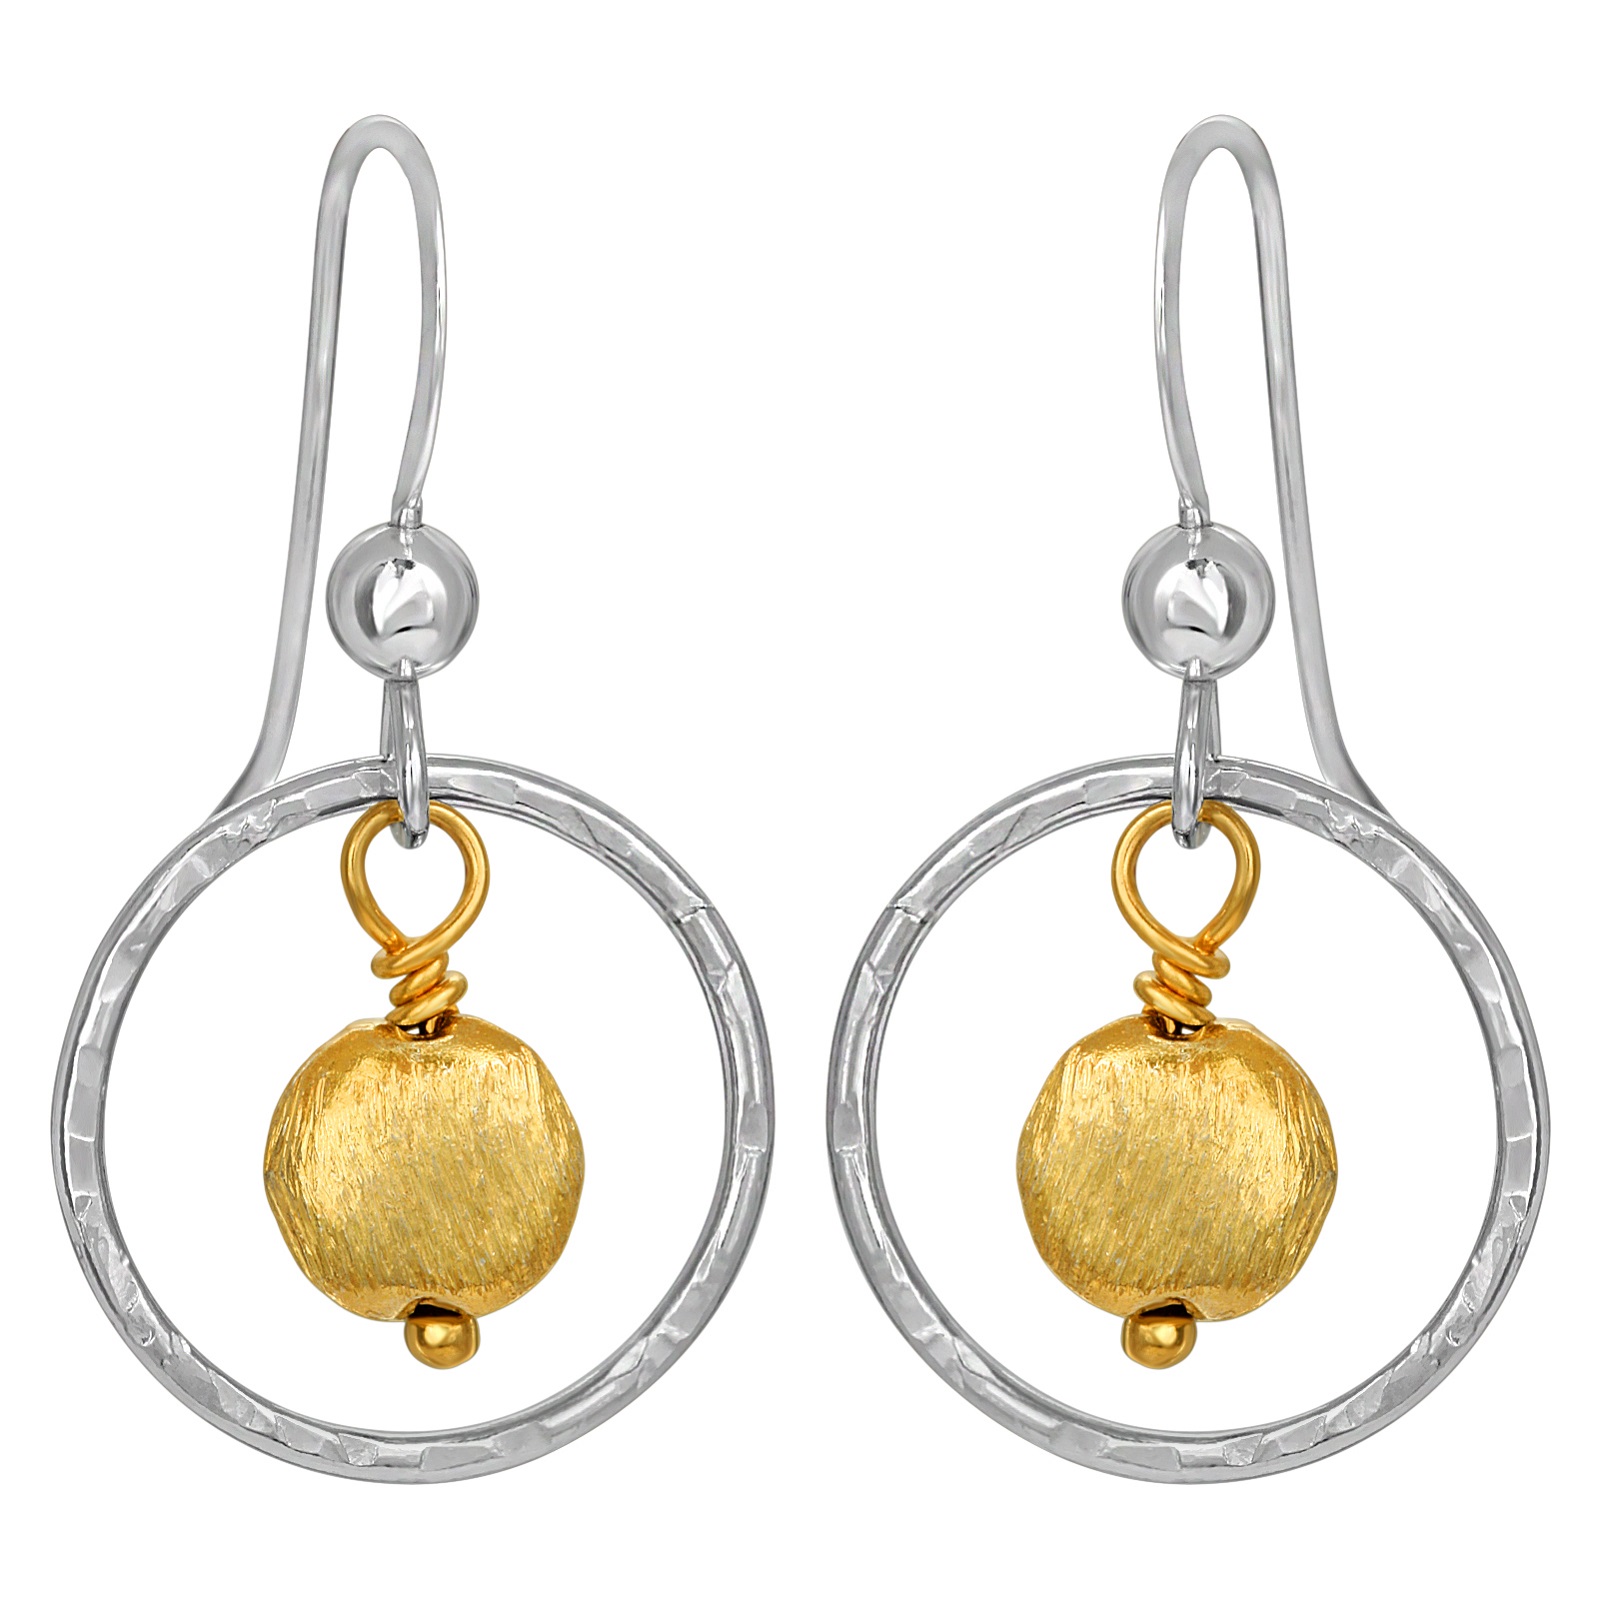 Two-Tone Hammered Earrings - Gold/Silver